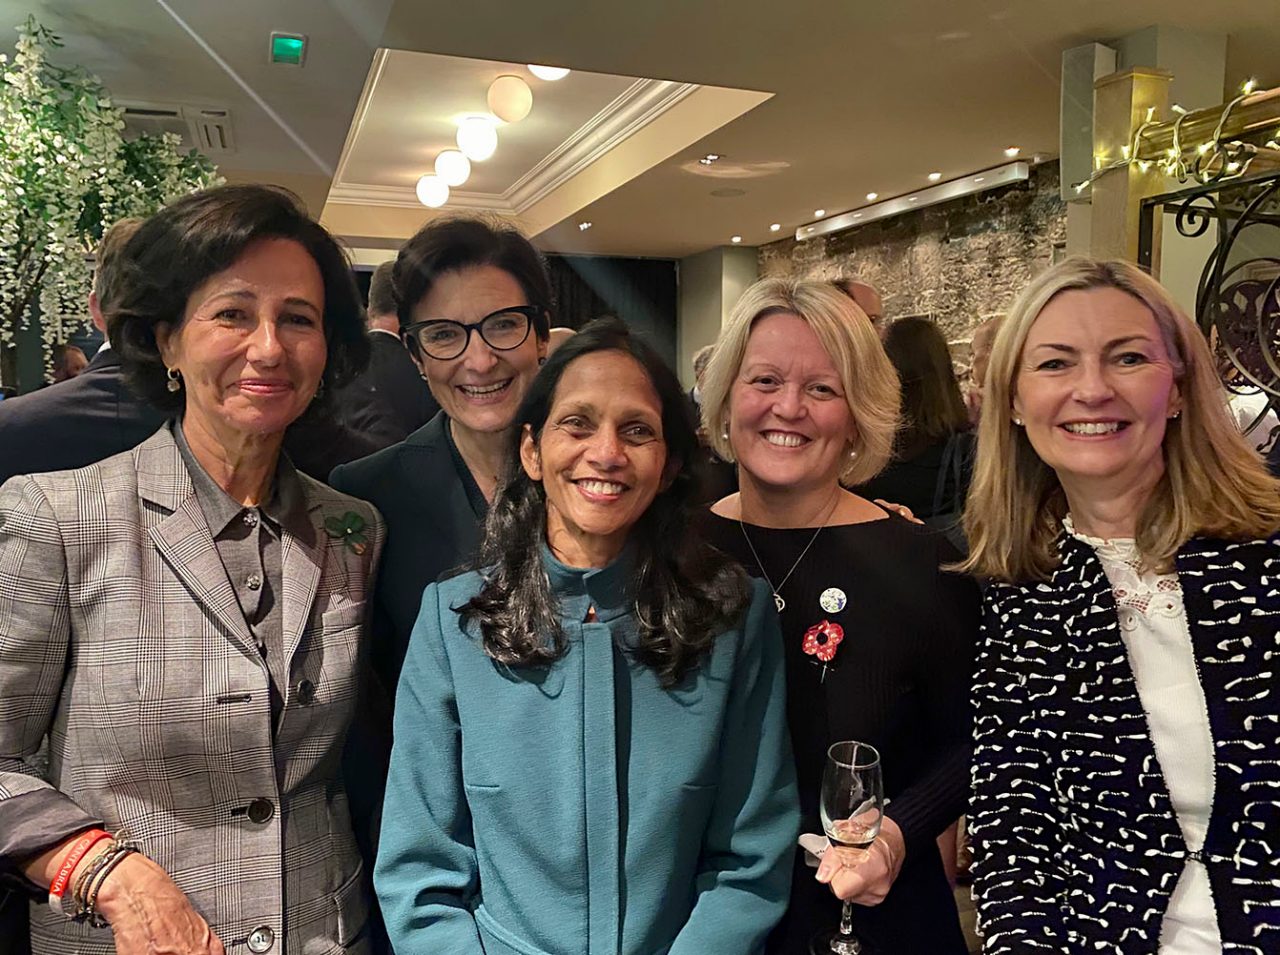 Shemara Wikramanayake, Managing Director and CEO of Macquarie Group (centre) with Ana Botín, Executive Chairman, Banco Santander (left); Jane Fraser, Chief Executive Officer of Citi (second from left); Alison Rose, Chief Executive of NatWest Group plc (second from right); and Anne Richards, CEO of Fidelity International (right).